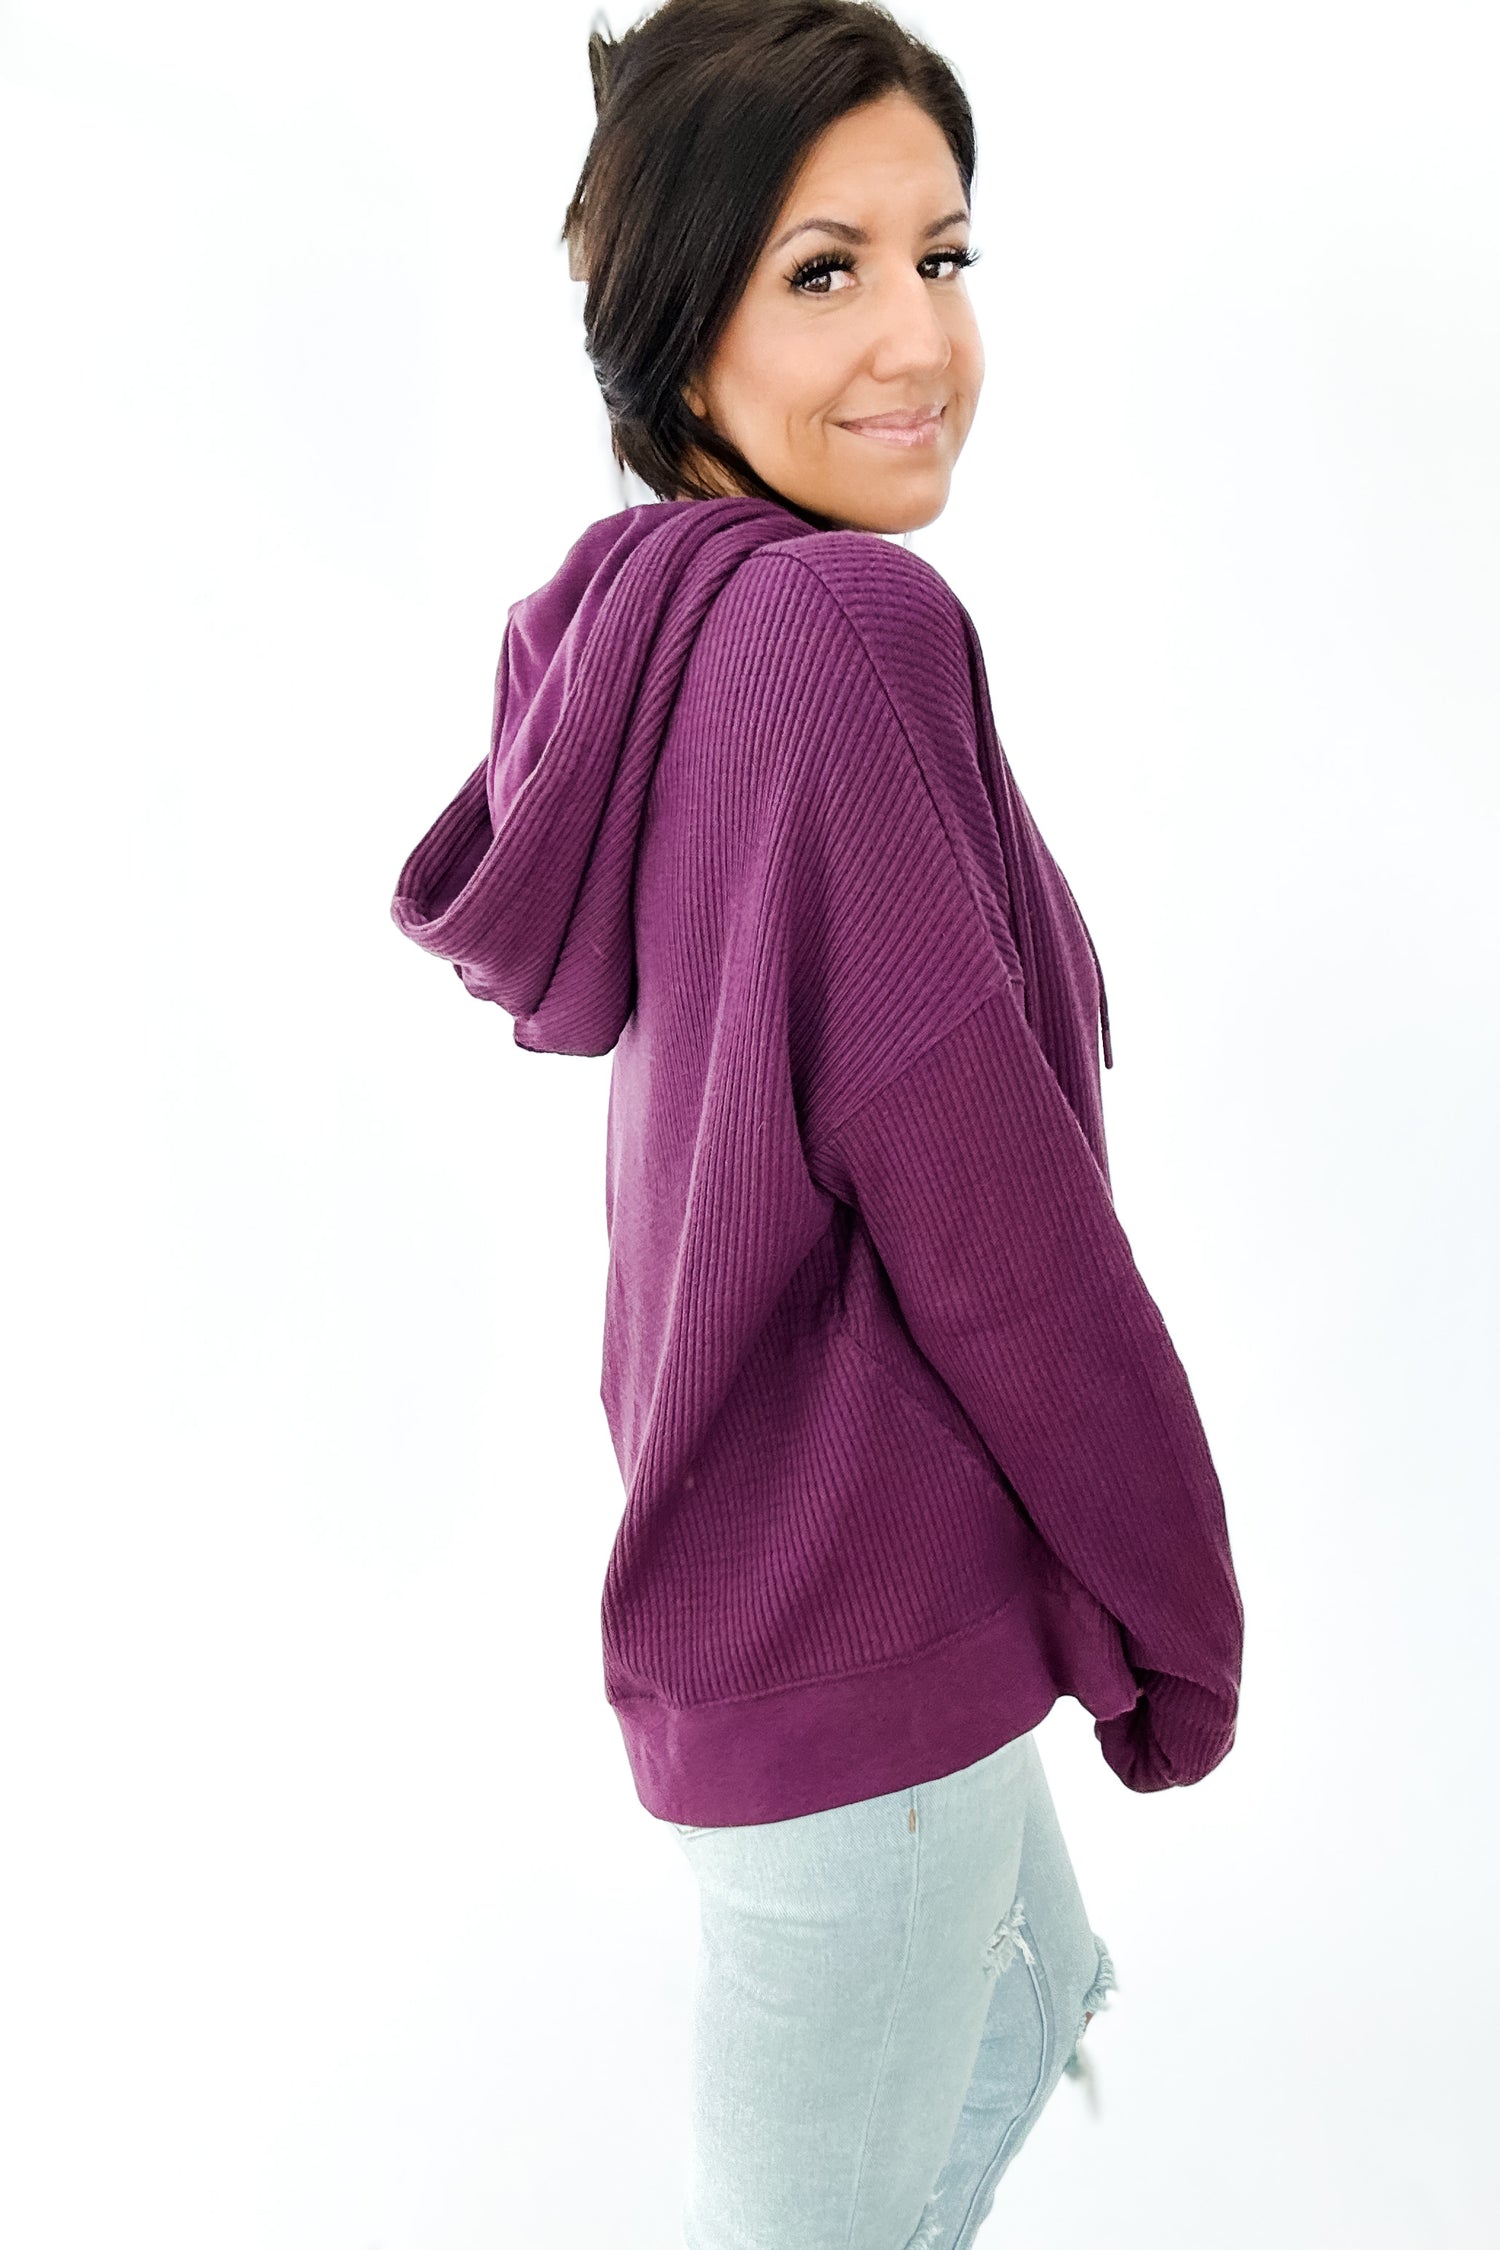 FREE TO DREAM RIBBED HOODIE IN PLUM - FINAL SALE